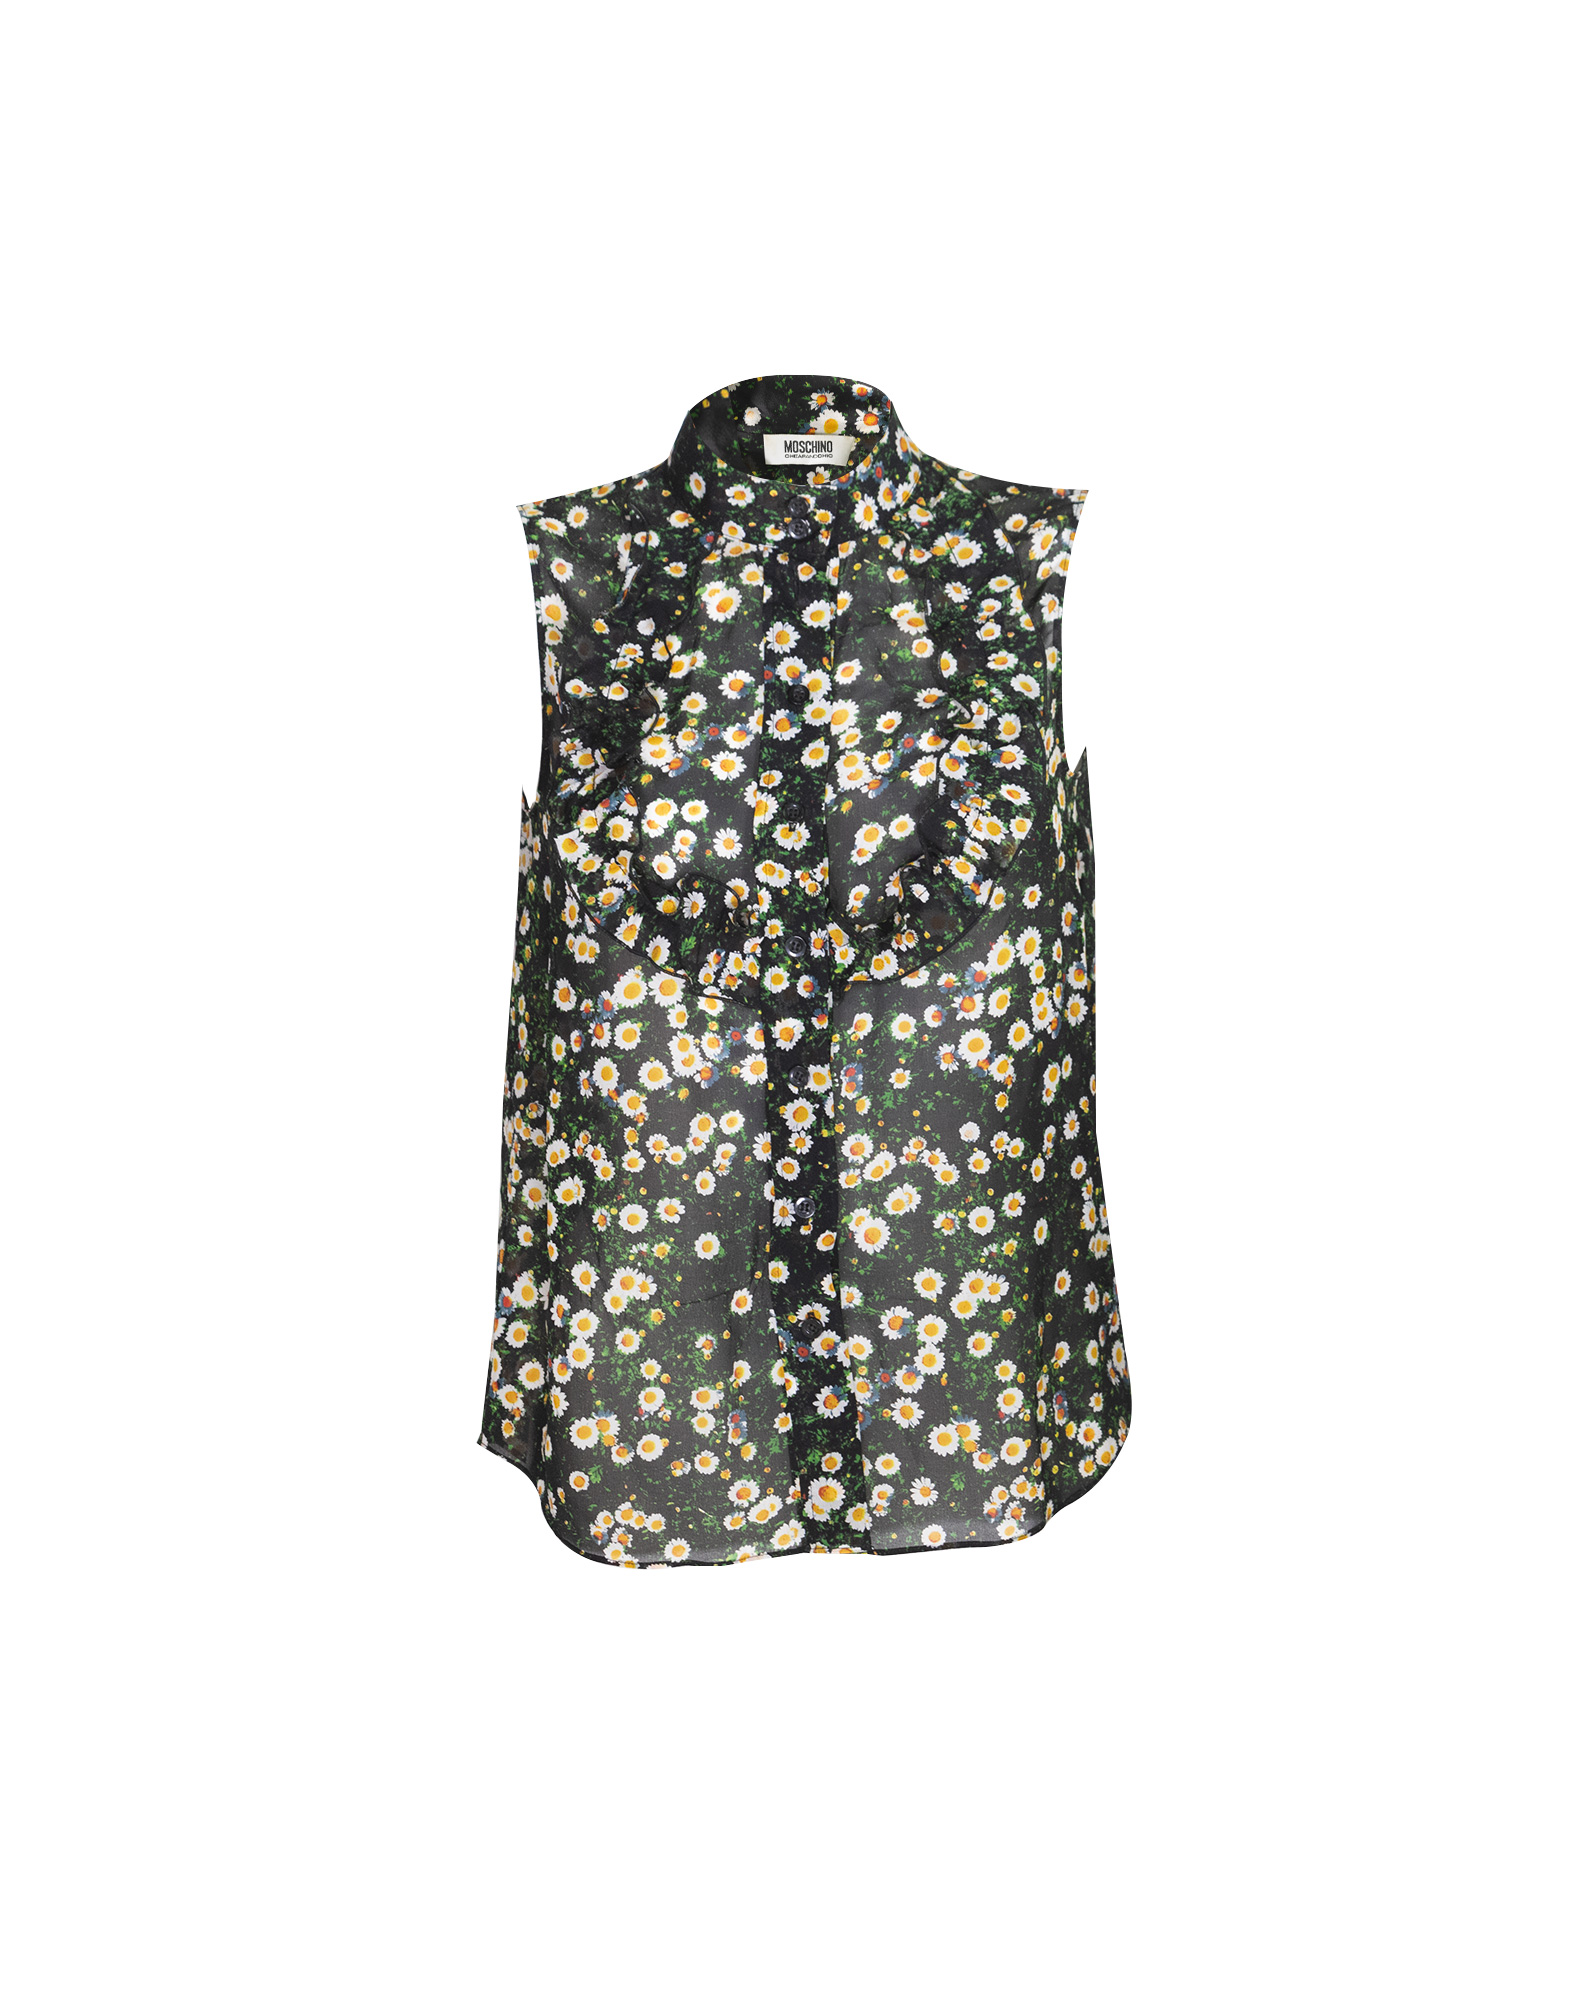 Moschino Cheap and Chic - 90s floral sleeveless shirt